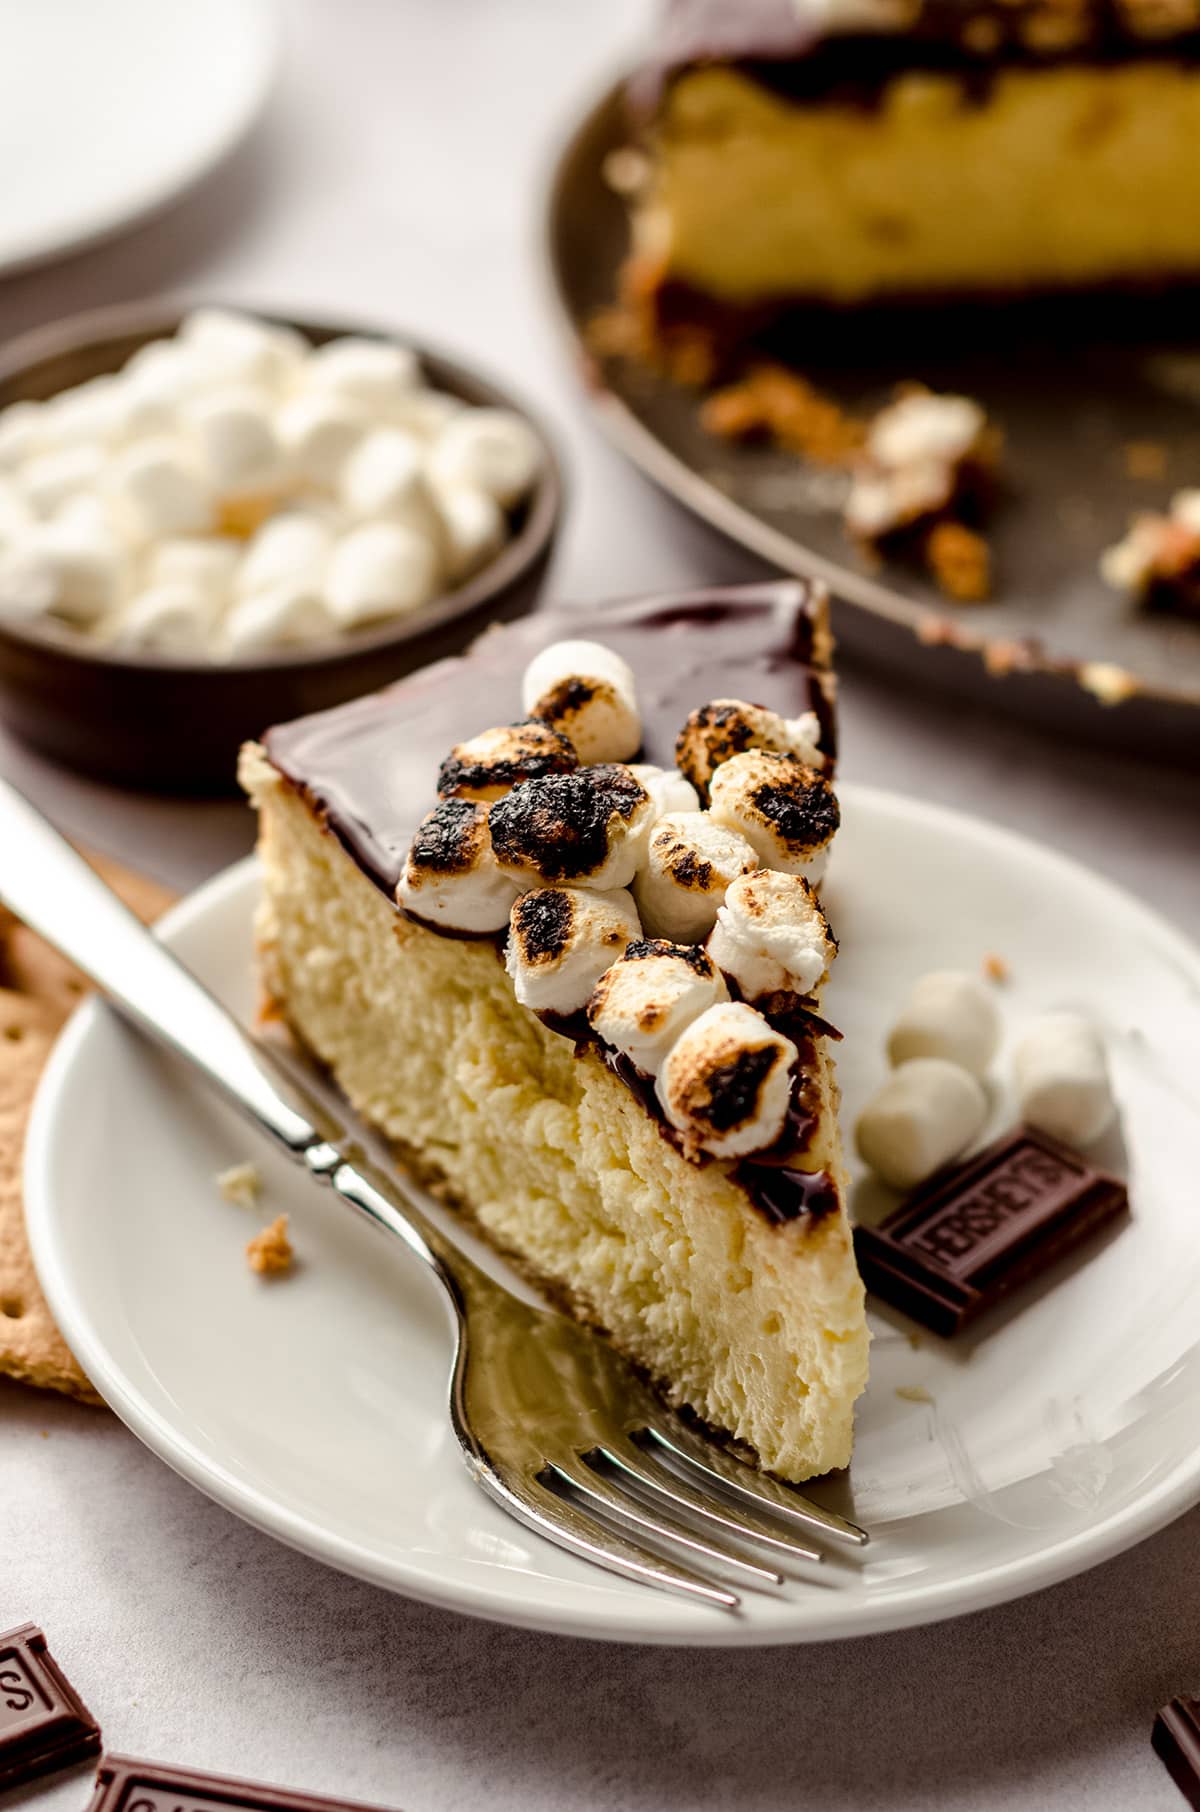 A slice of S'mores cheesecake with marshmallows on top.